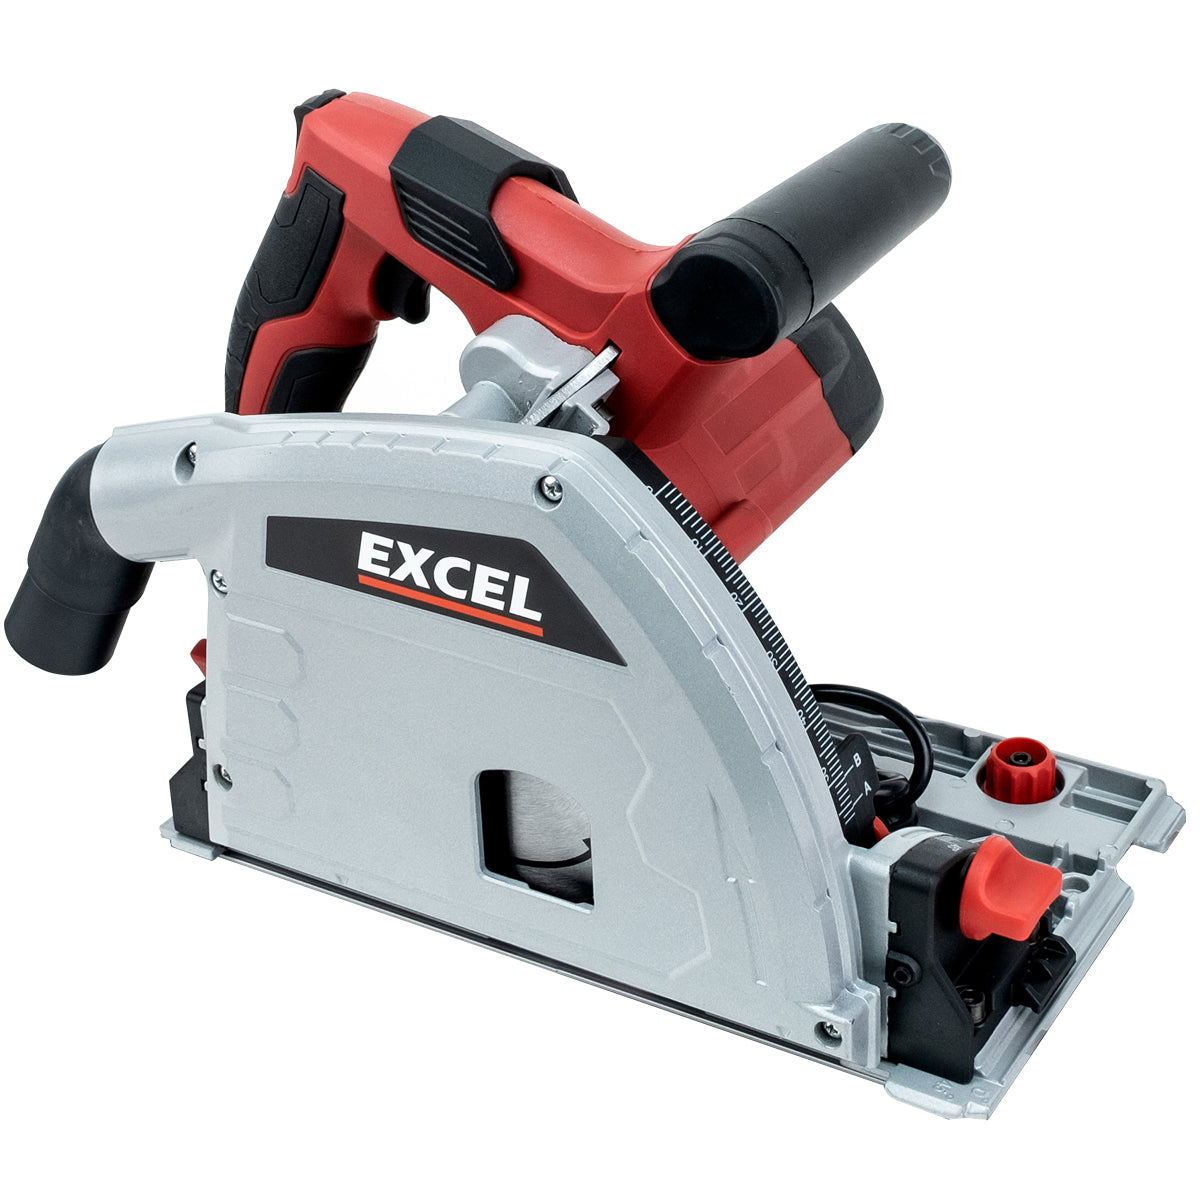 Excel 165mm Plunge Saw 1200W/240V with Guide Rail Set